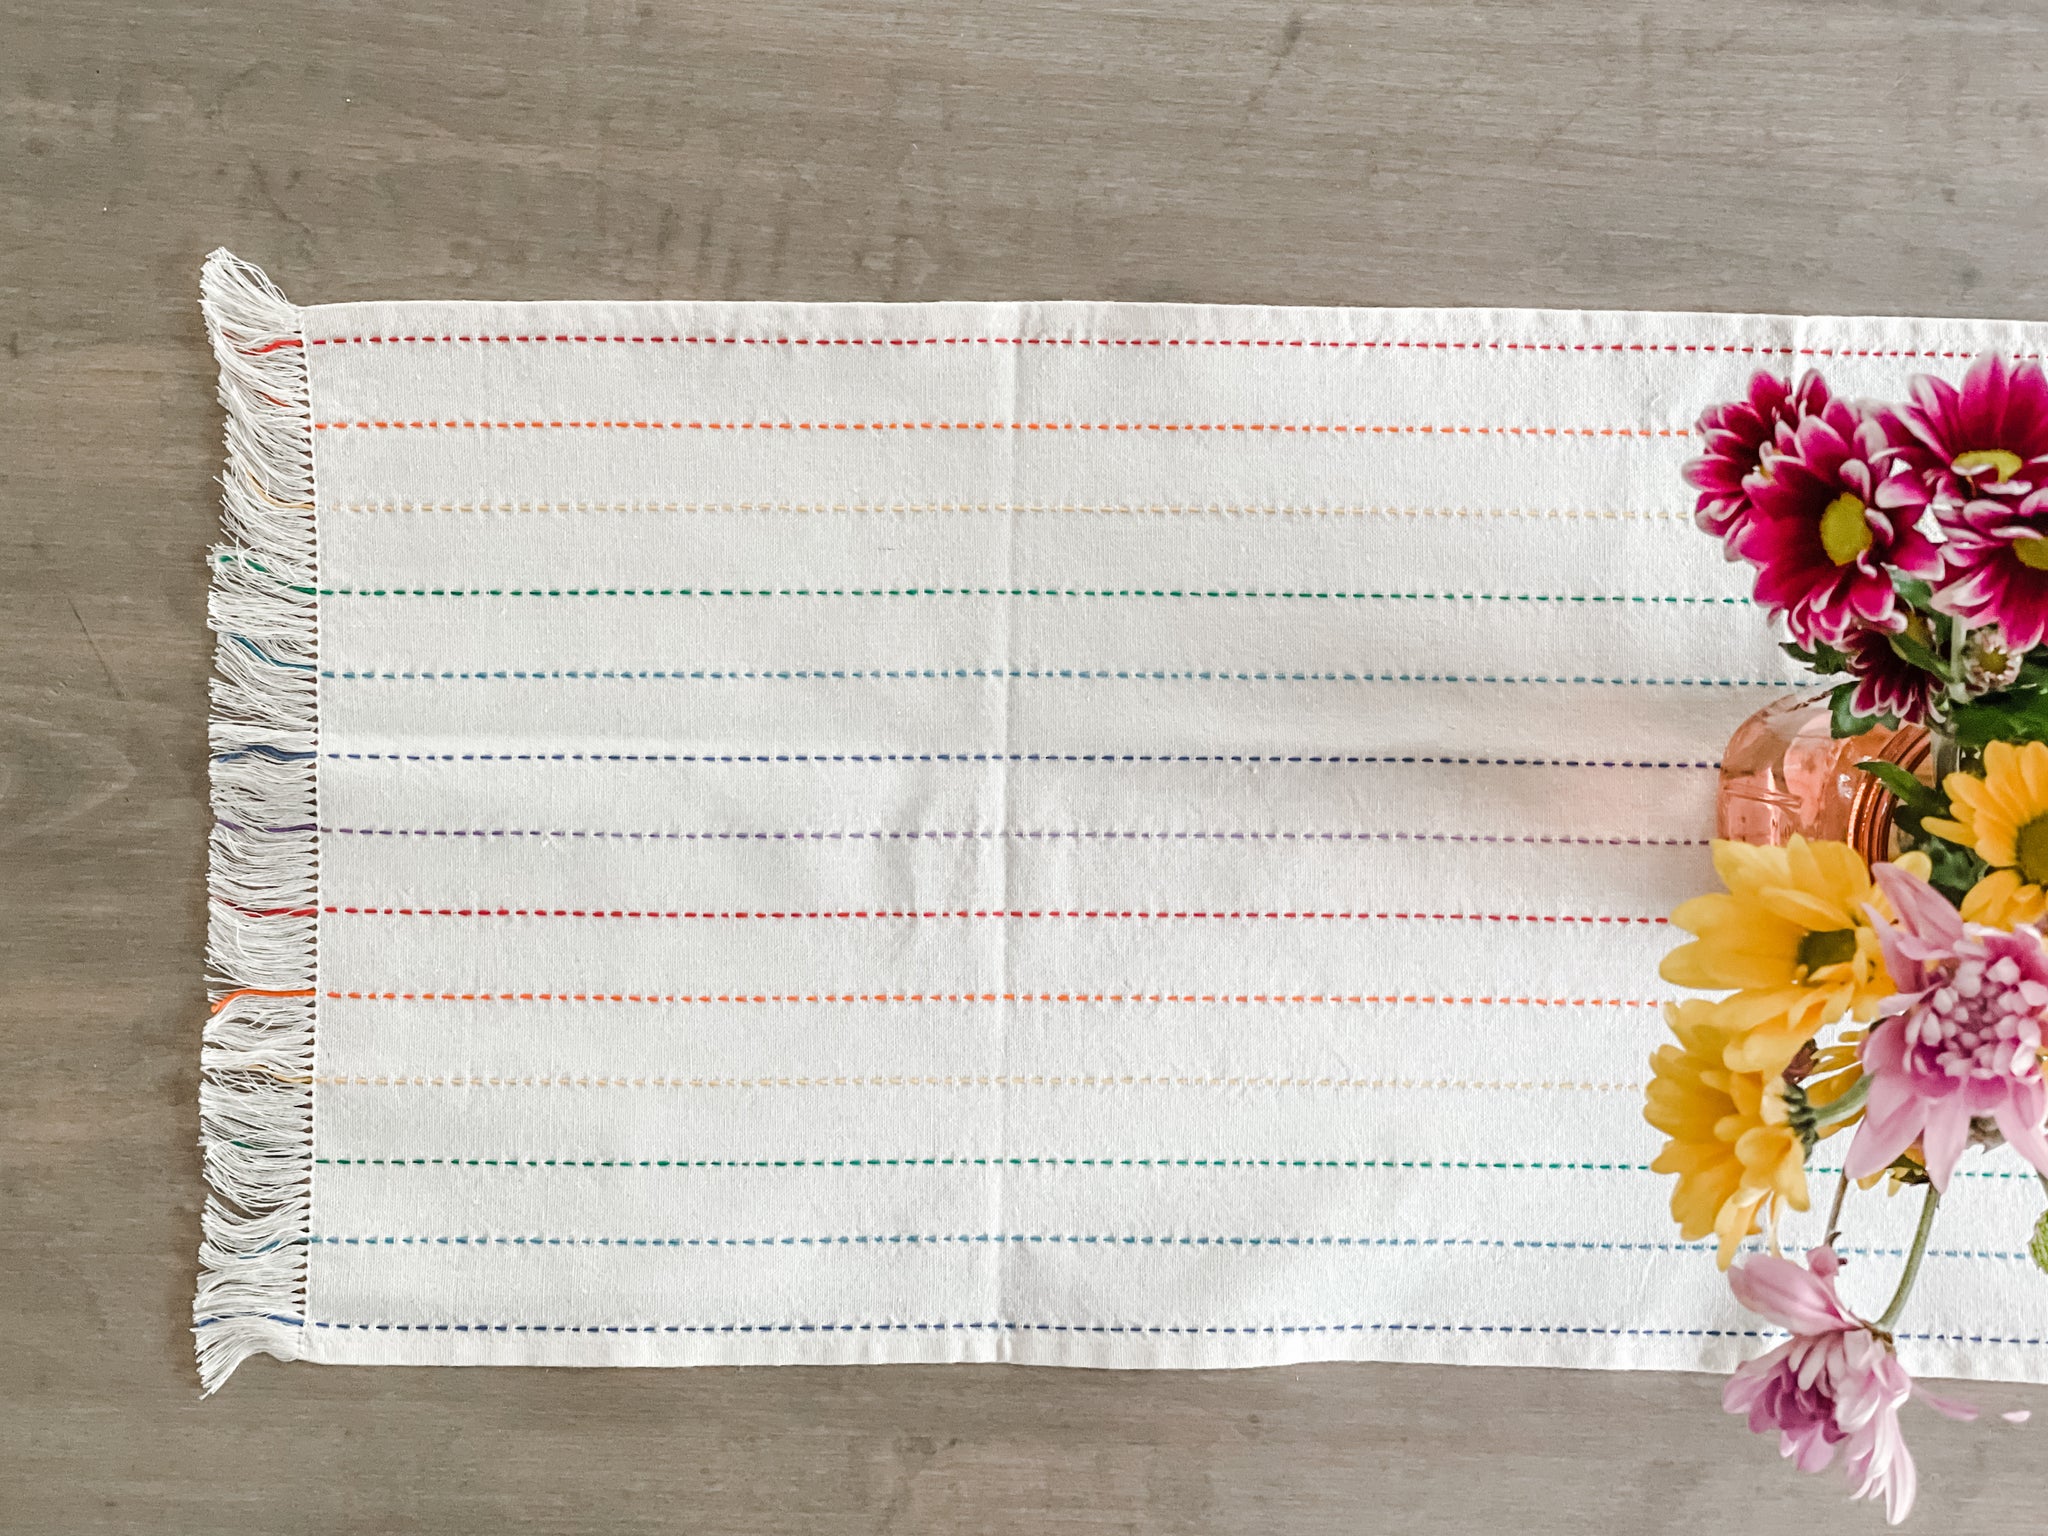 Hand-Stitched Table Runner